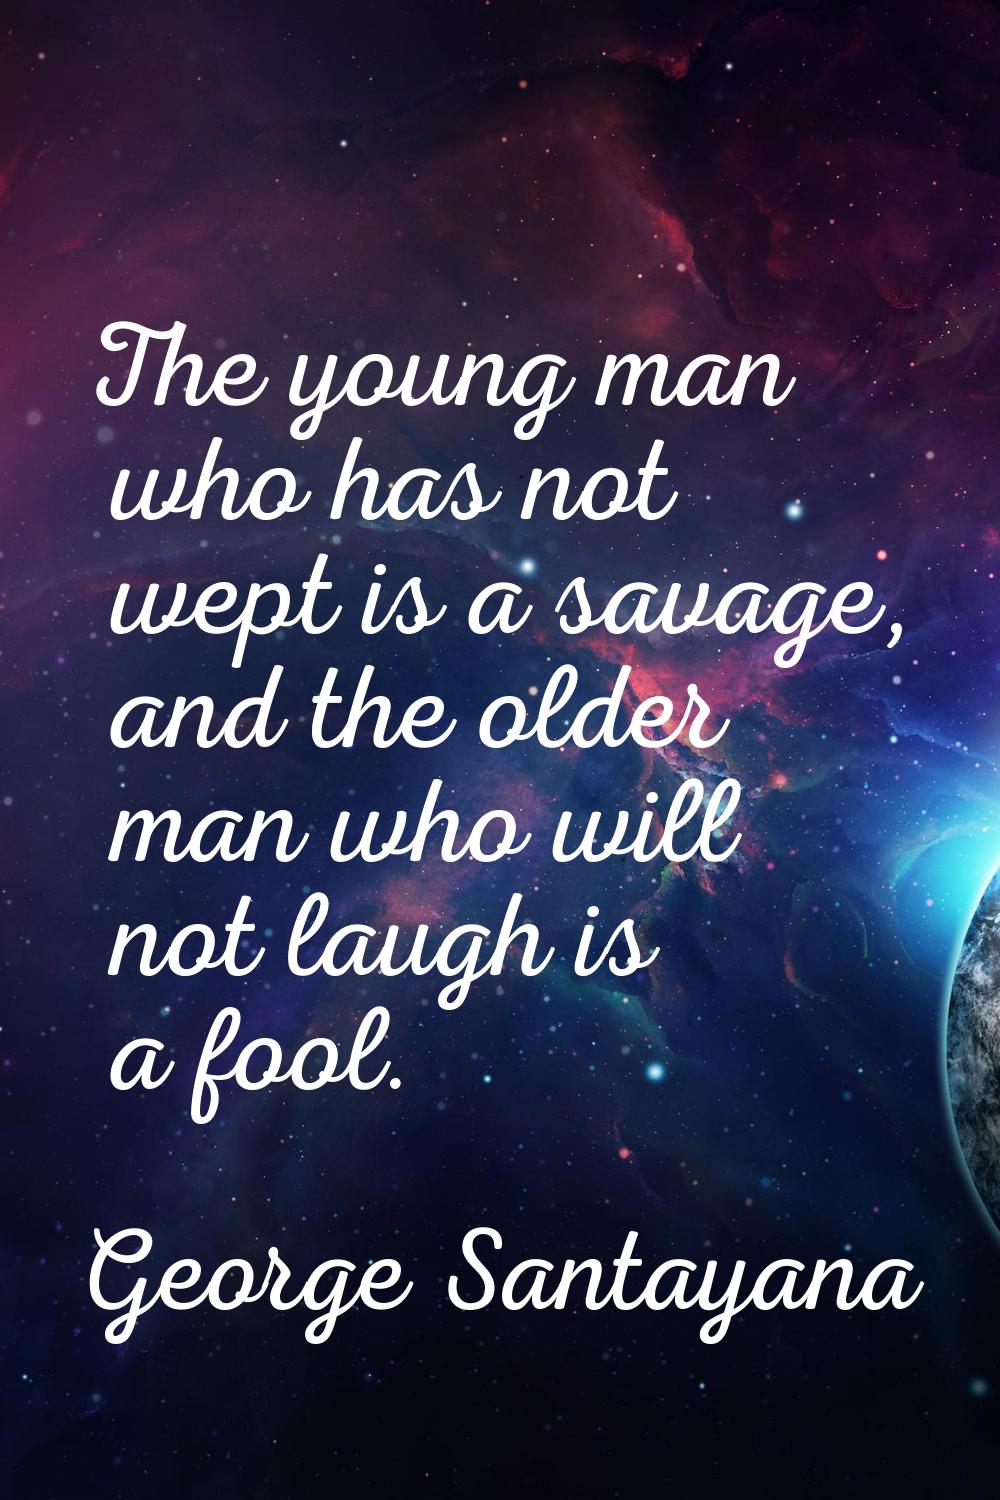 The young man who has not wept is a savage, and the older man who will not laugh is a fool.